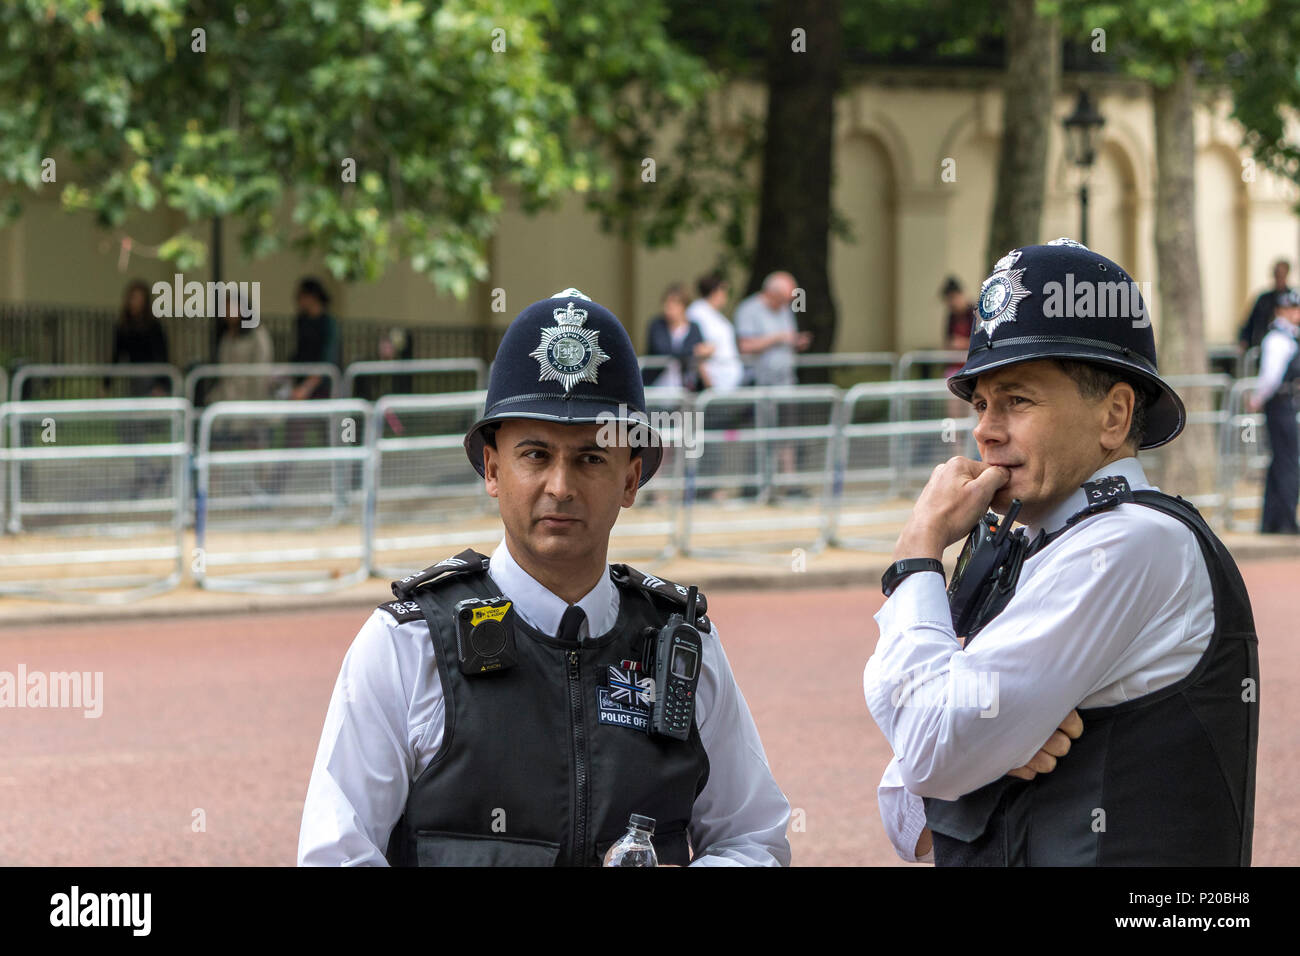 Two Metropolitan Police Officers on duty at The Mall for The Trooping The Colour parade in London,UK Stock Photo